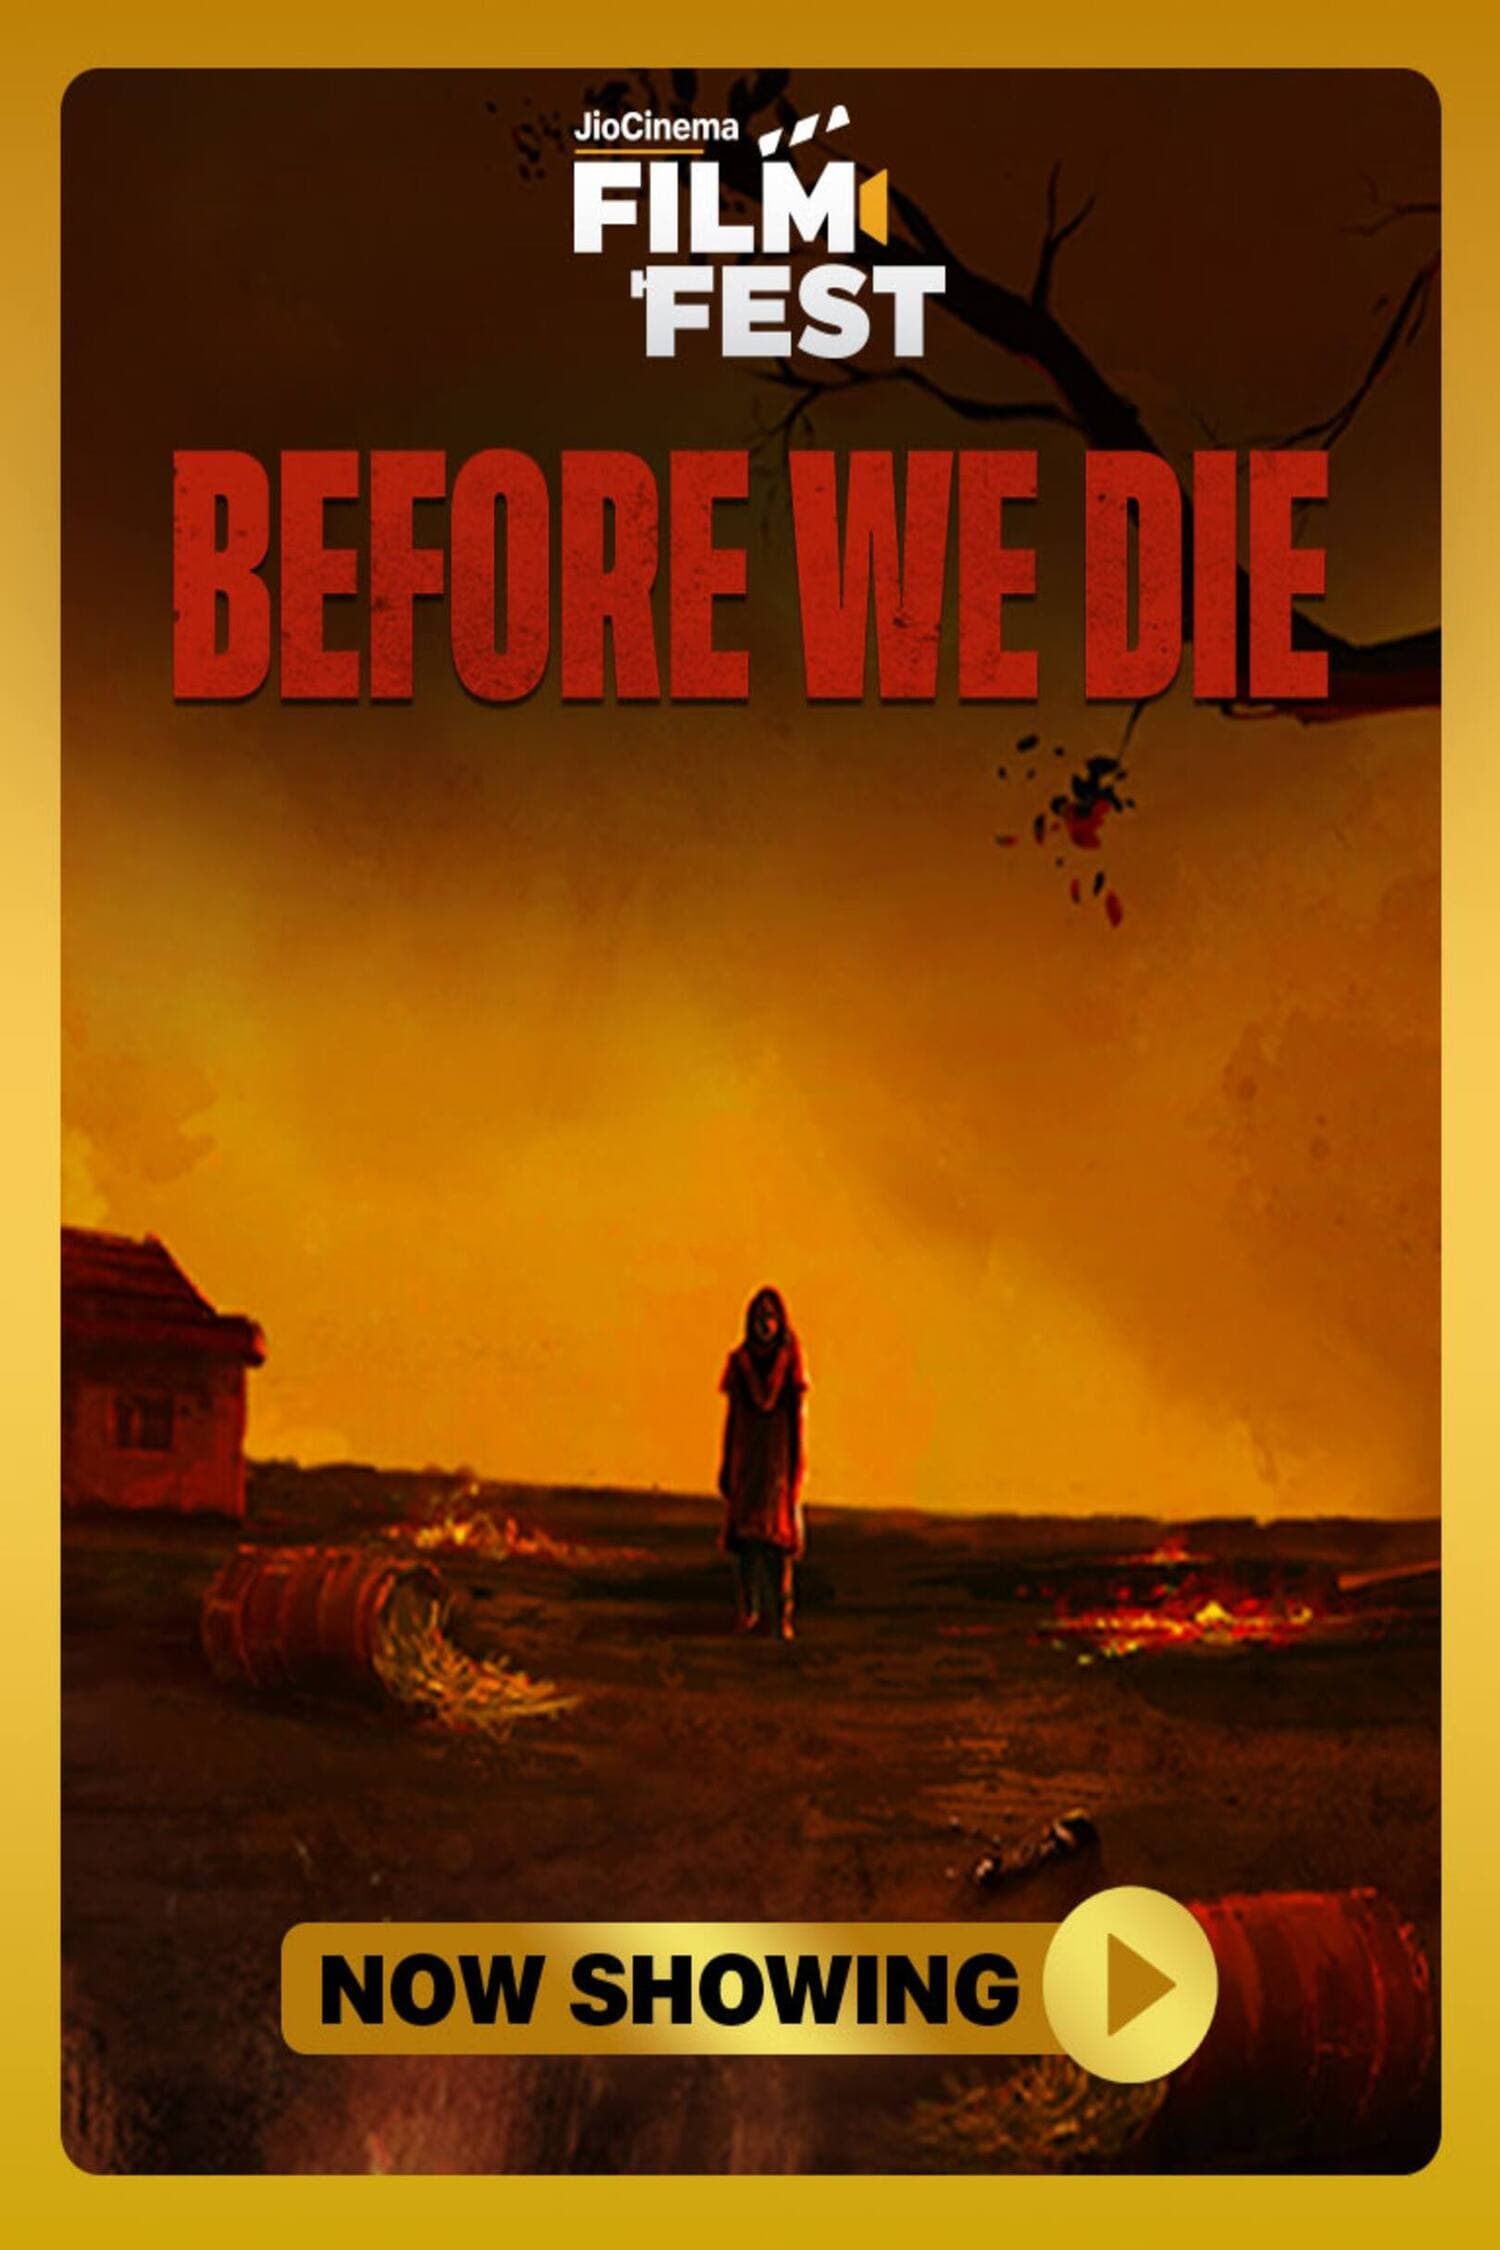 Poster for the movie "Before we die"